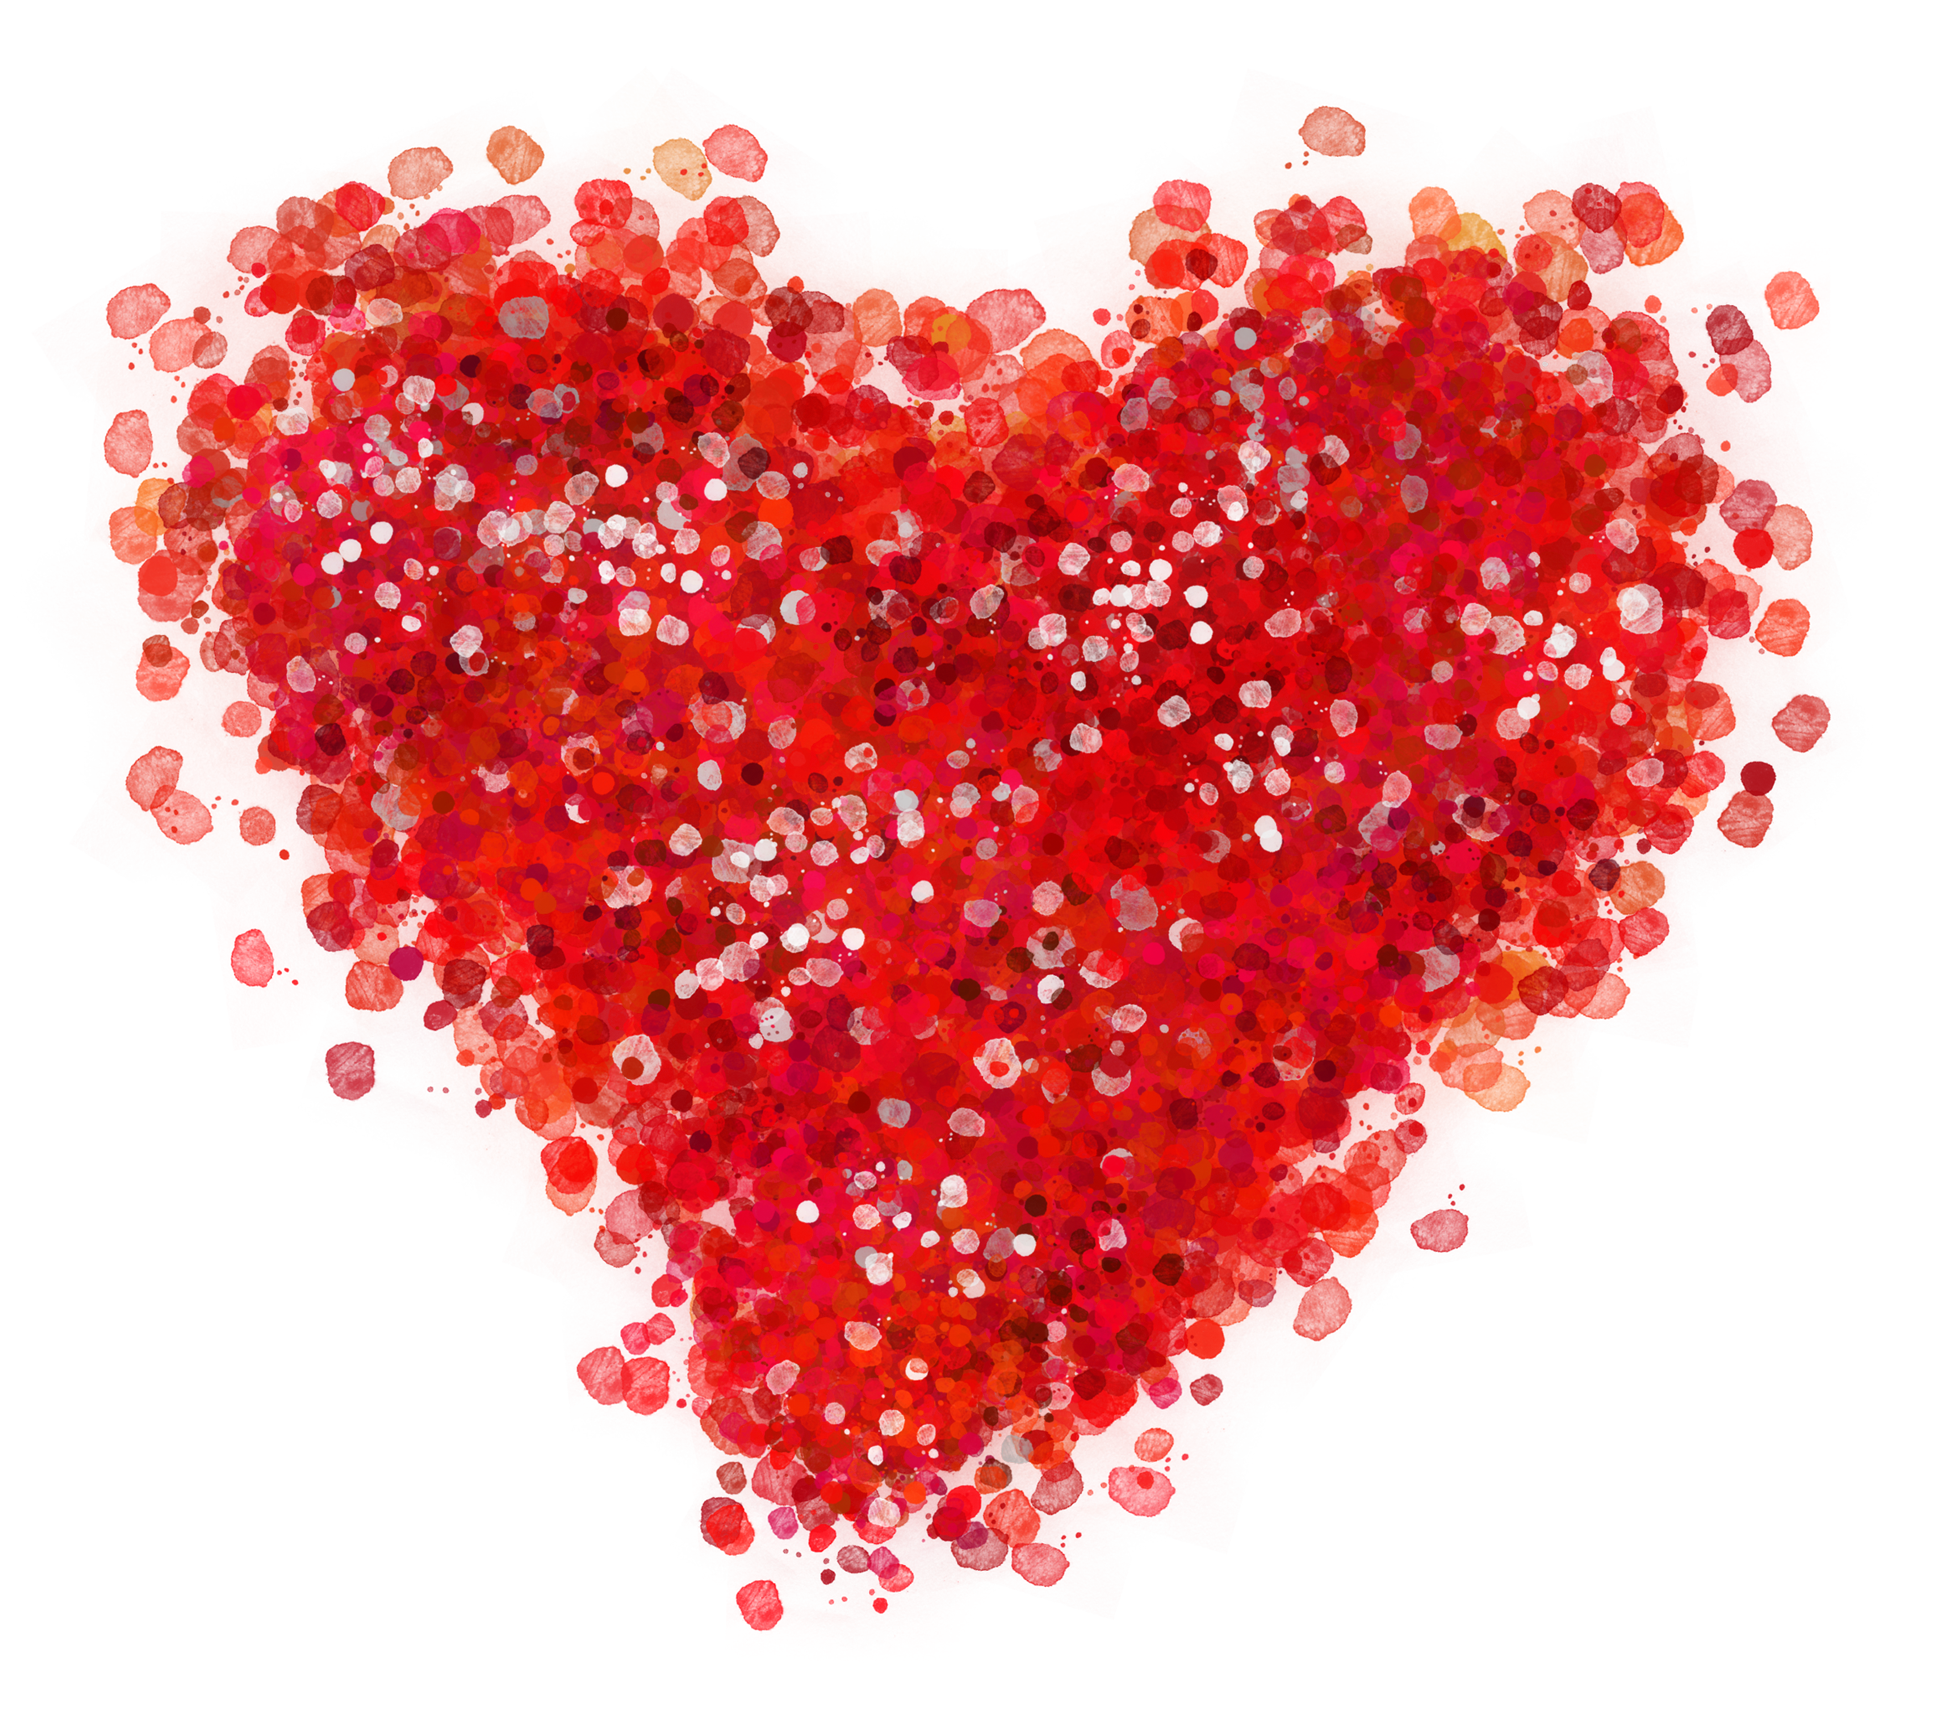 clipart hearts red